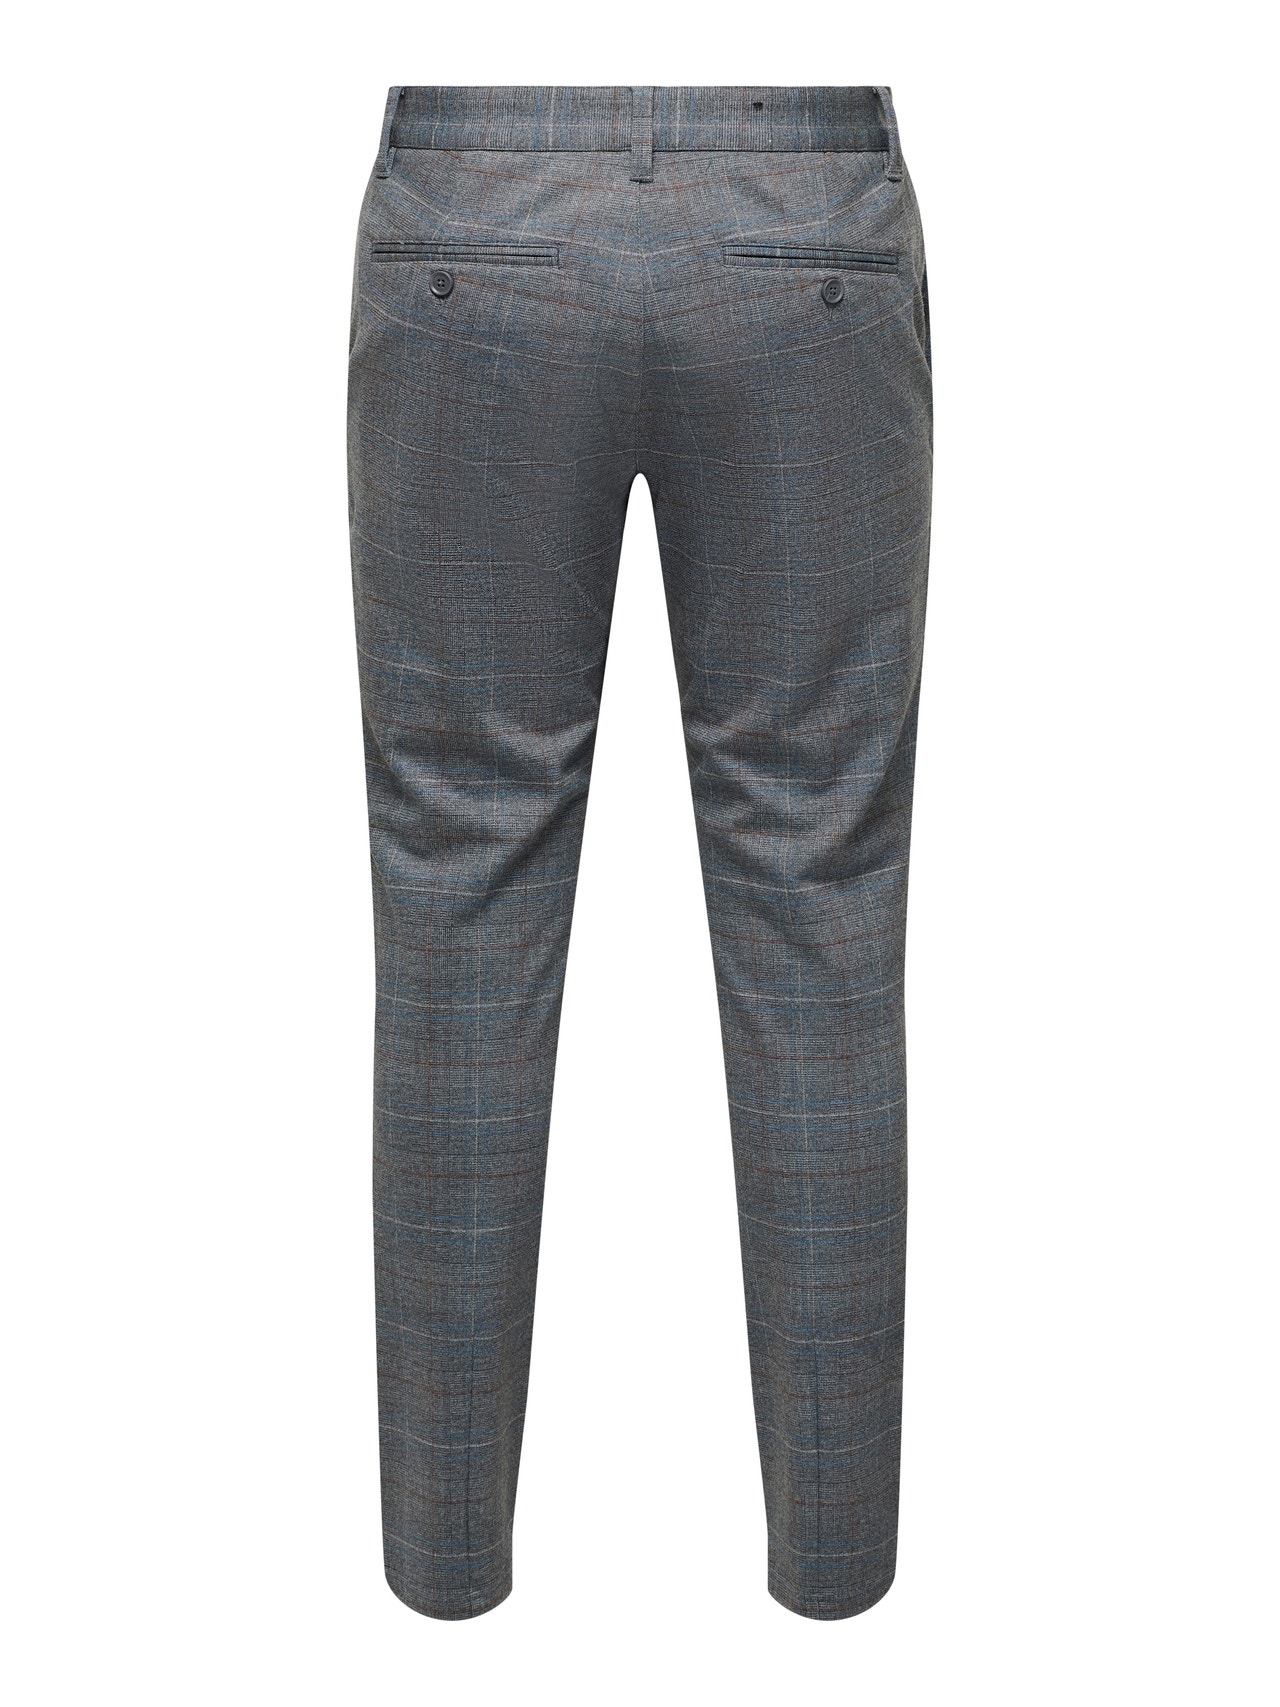 ONLY & SONS ONSMARK TAP CHECK 02092 -Grey Pinstripe - 22025378